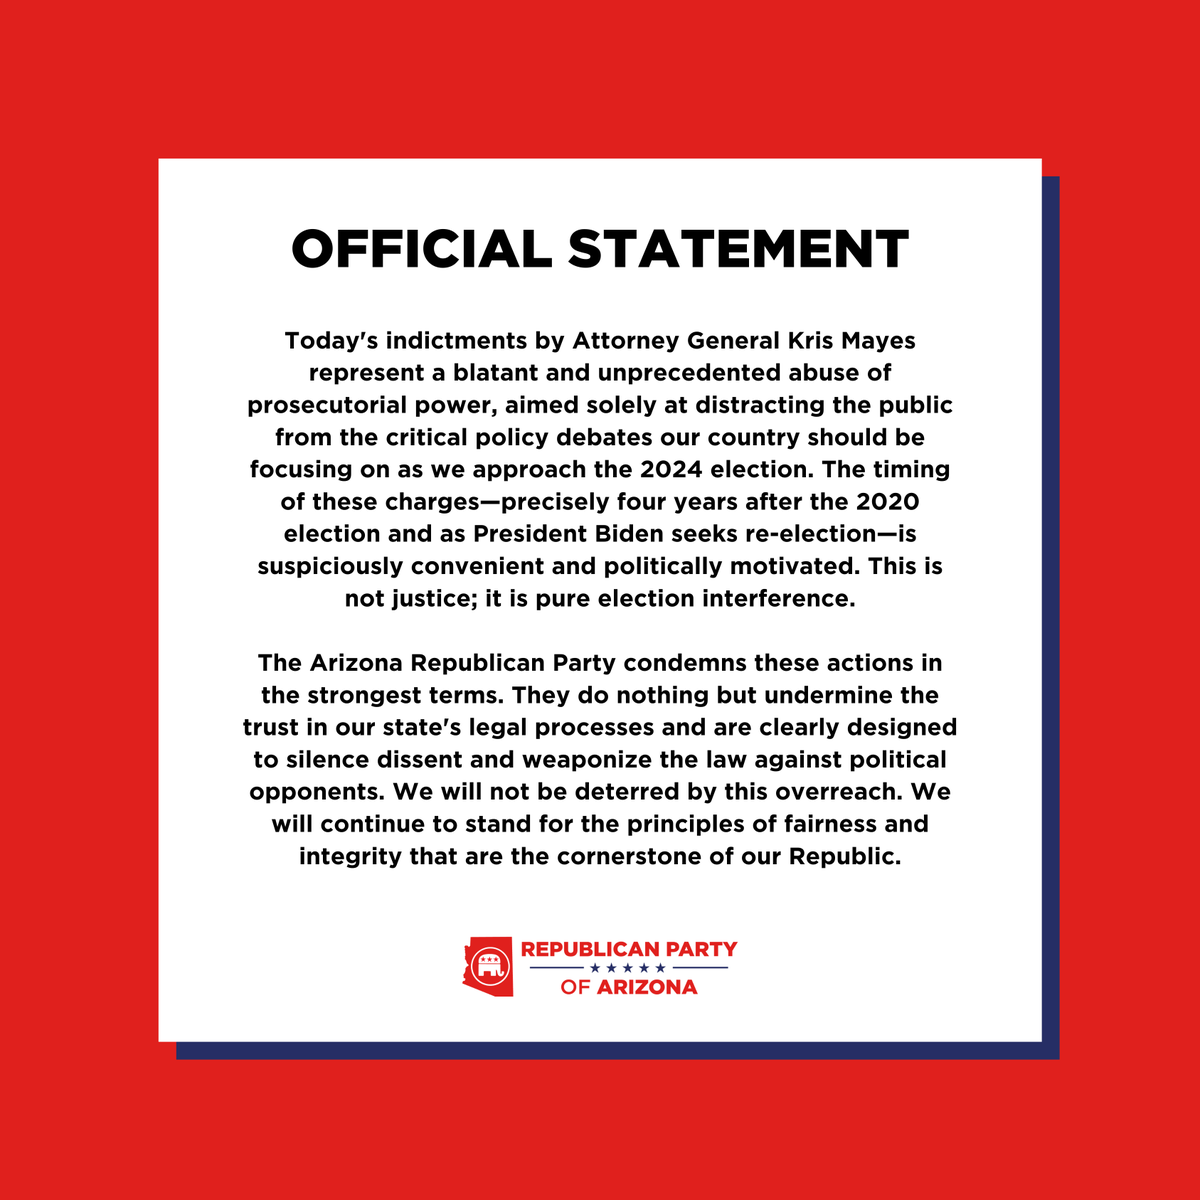 Our official statement regarding AG Kris Mayes' politically motivated indictments and blatant abuse of legal authority aimed to disrupt, distract, and interfere in the 2024 election.